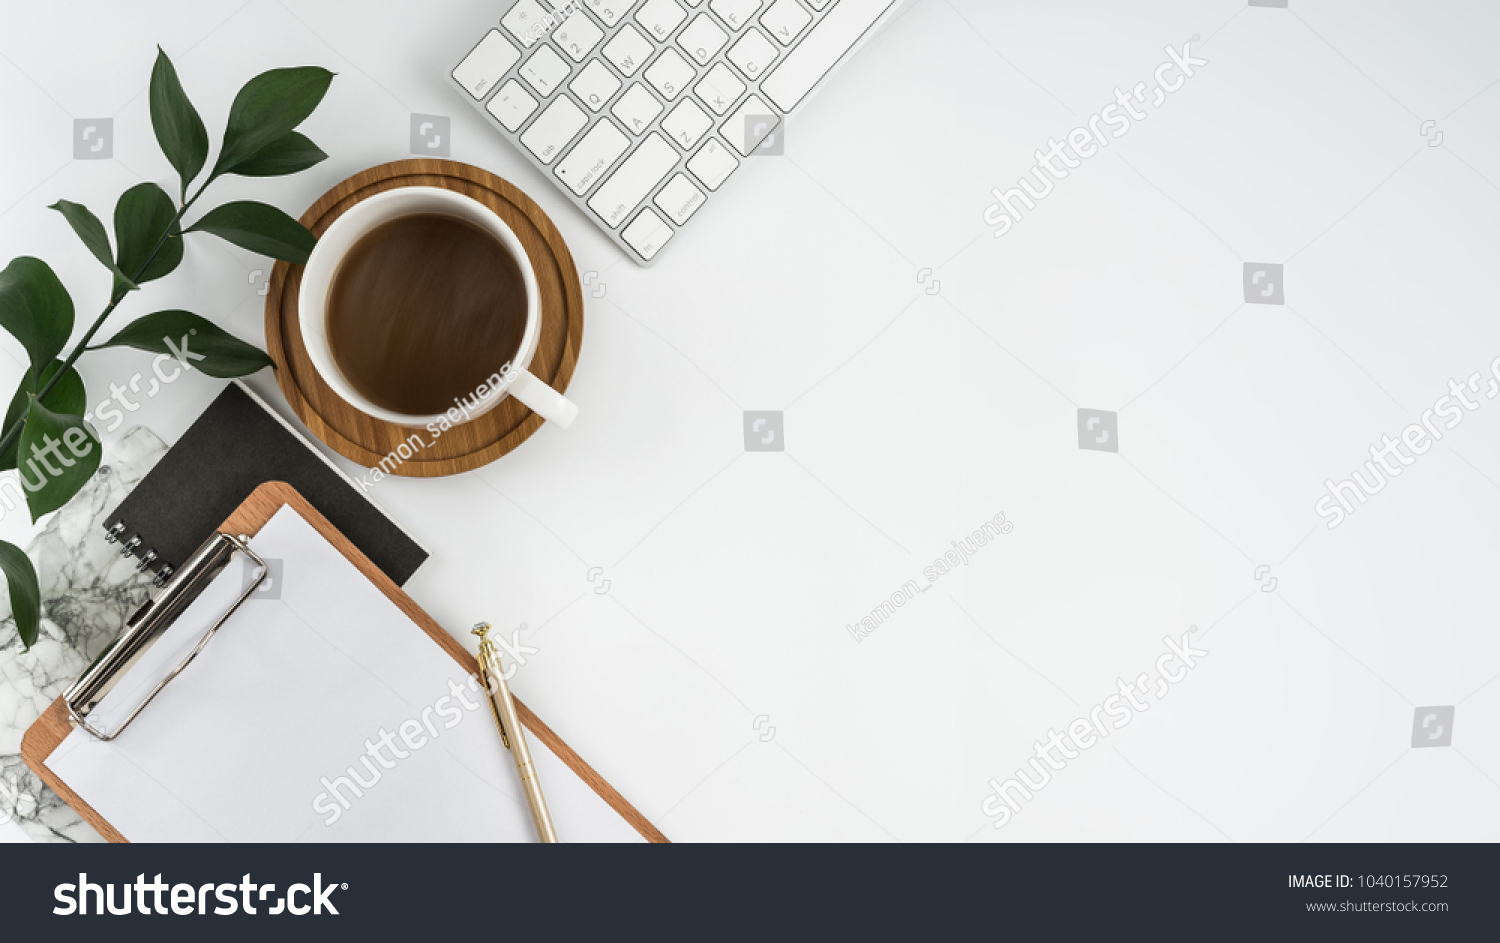 Styled stock photography white office desk table with blank notebook, computer, supplies and coffee cup. Top view with copy space. Flat lay. #1040157952